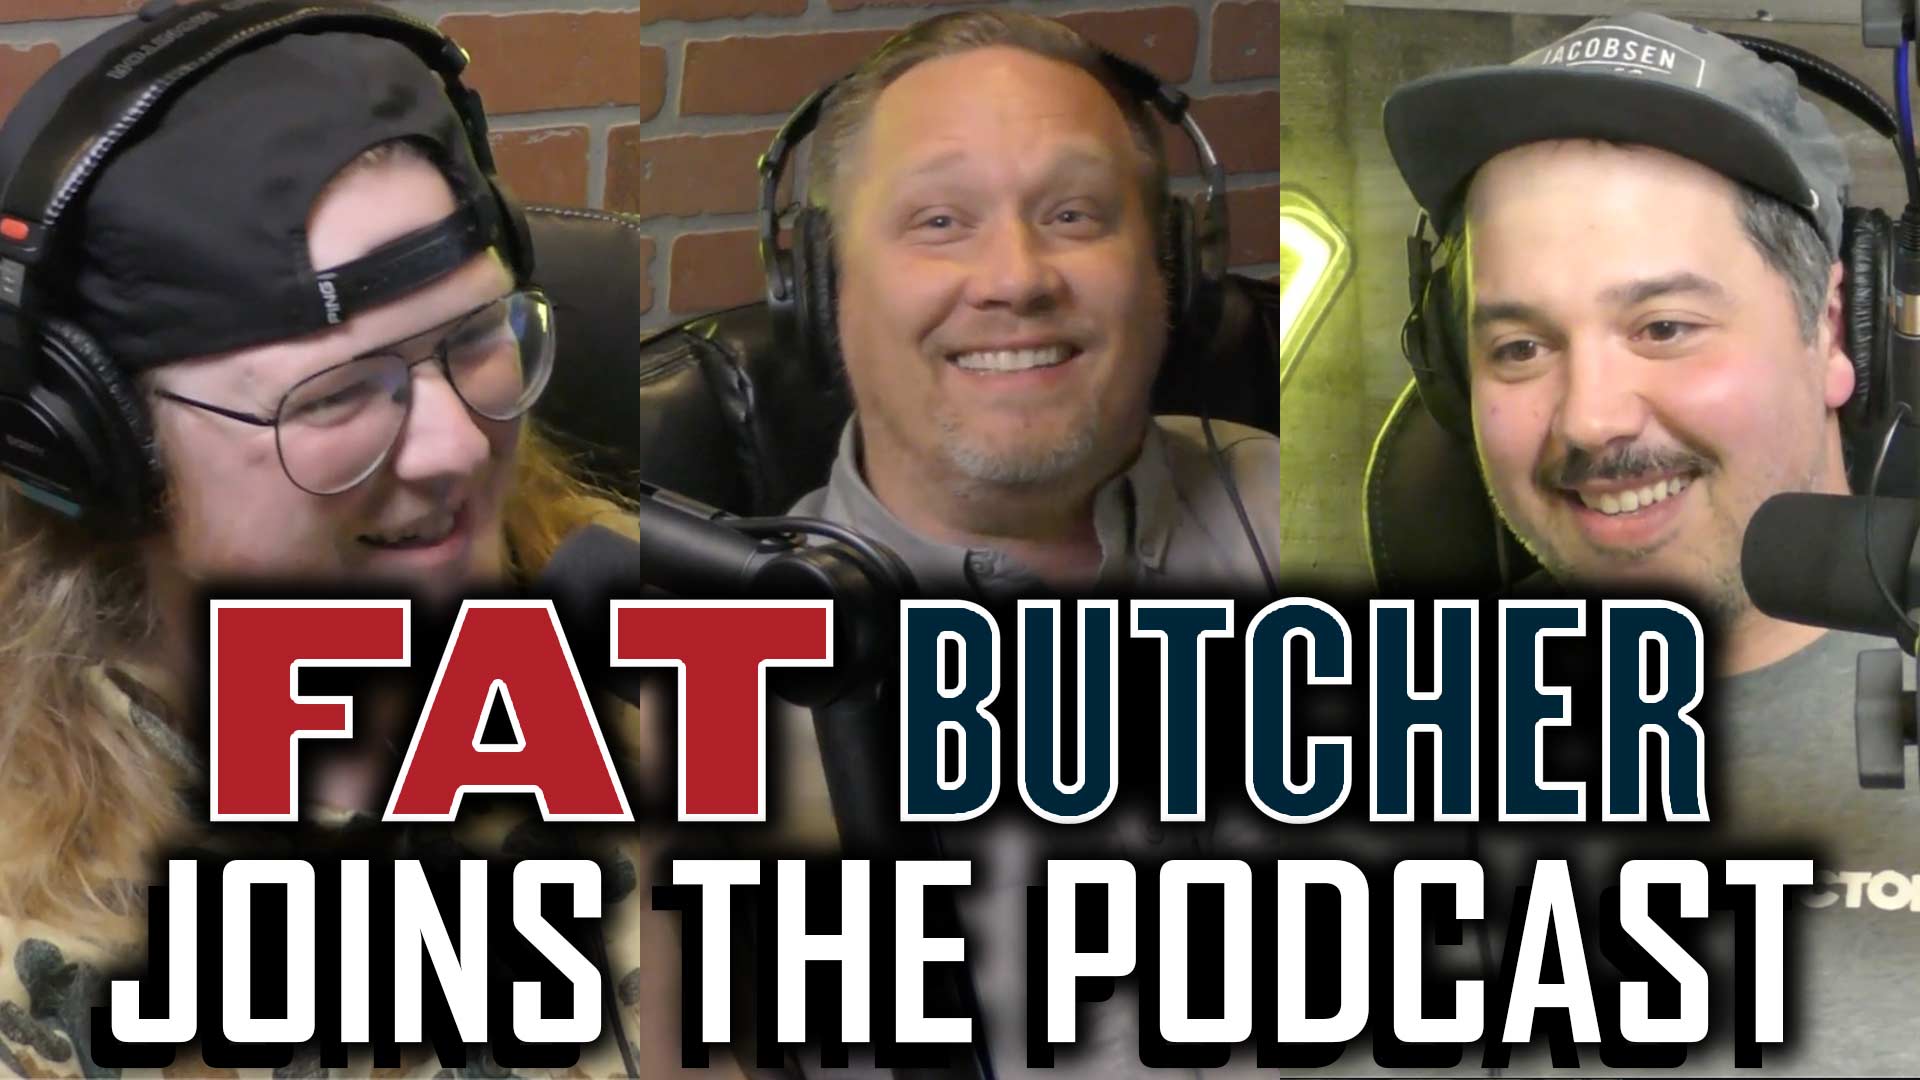 steve-dawson-fat-butcher-lawrenceville-podcast-247-fighting-pittsburgh